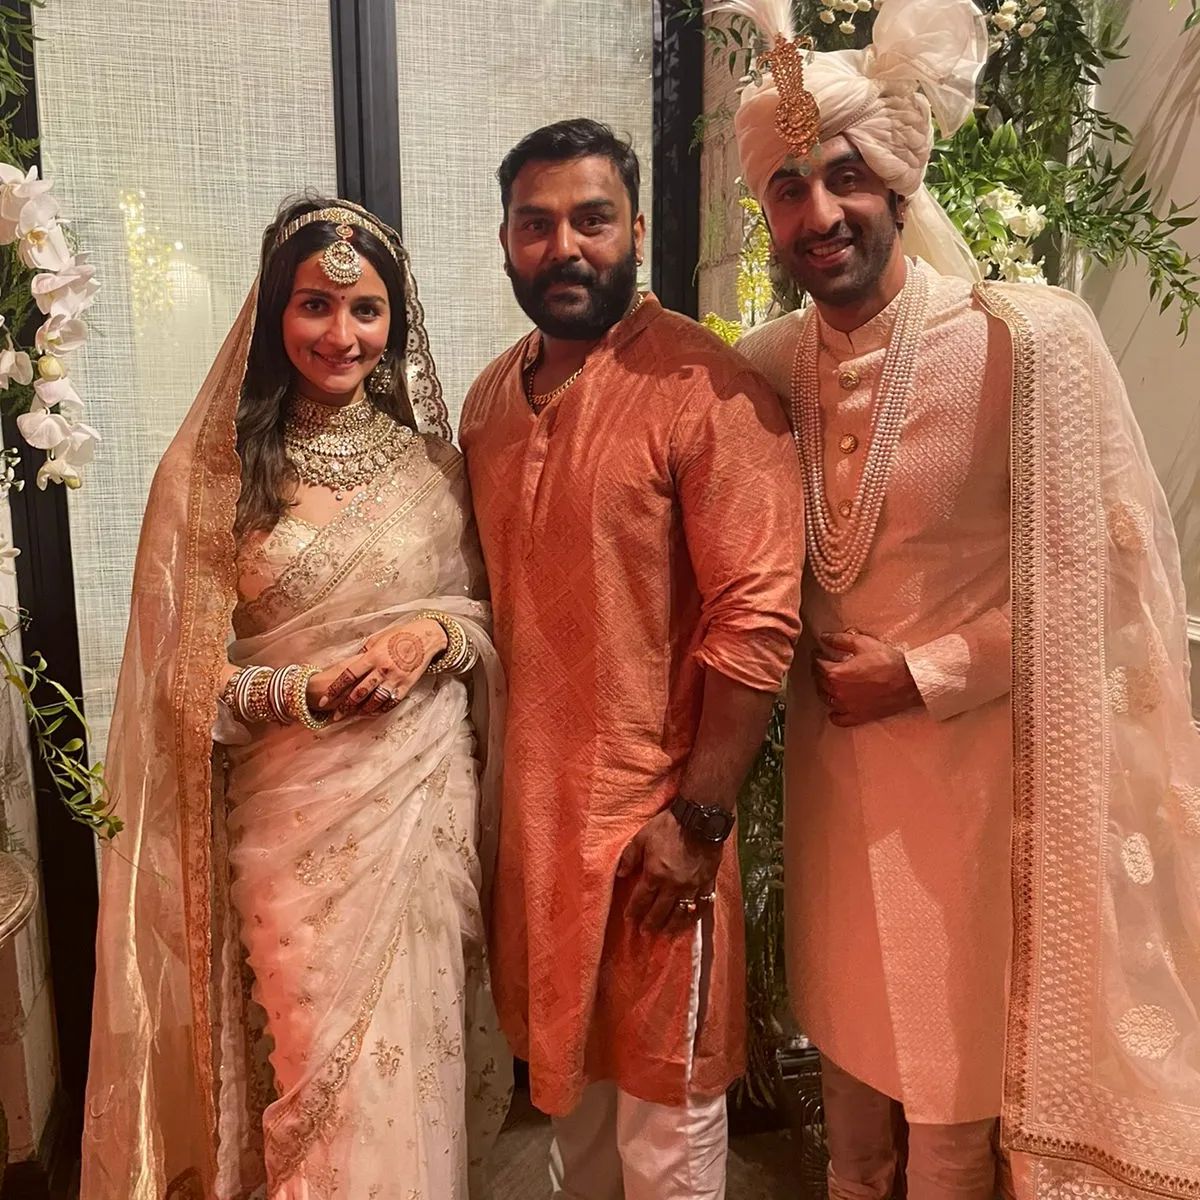 278494131 689046992148725 4086767215033252391 n 2 Alia Bhatt's bodyguard shared a special picture of Alia's wedding, wrote, "From holding your little hands to watching you become a bride"